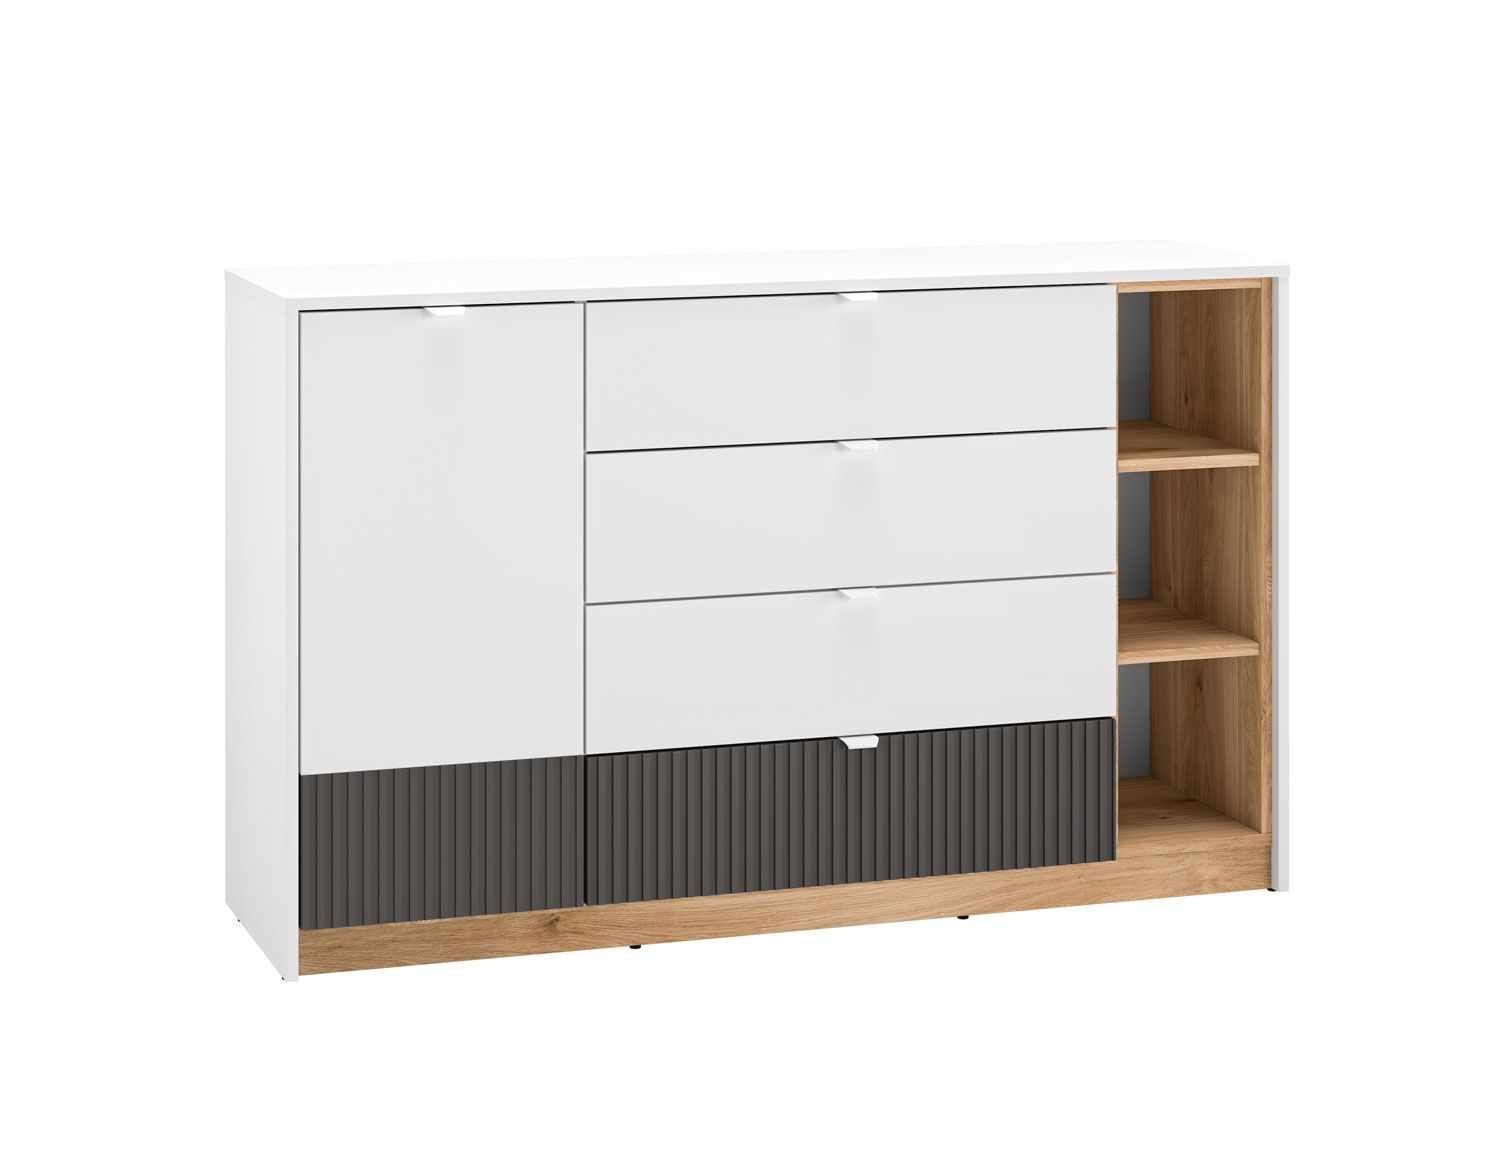 Timeless chest of drawers with soft-close system Mackinac 06, color: white / oak / graphite matt, handles: Metal, dimensions: 86 x 138 x 40 cm, with one door, four drawers and five compartments, easy to combine with other furniture